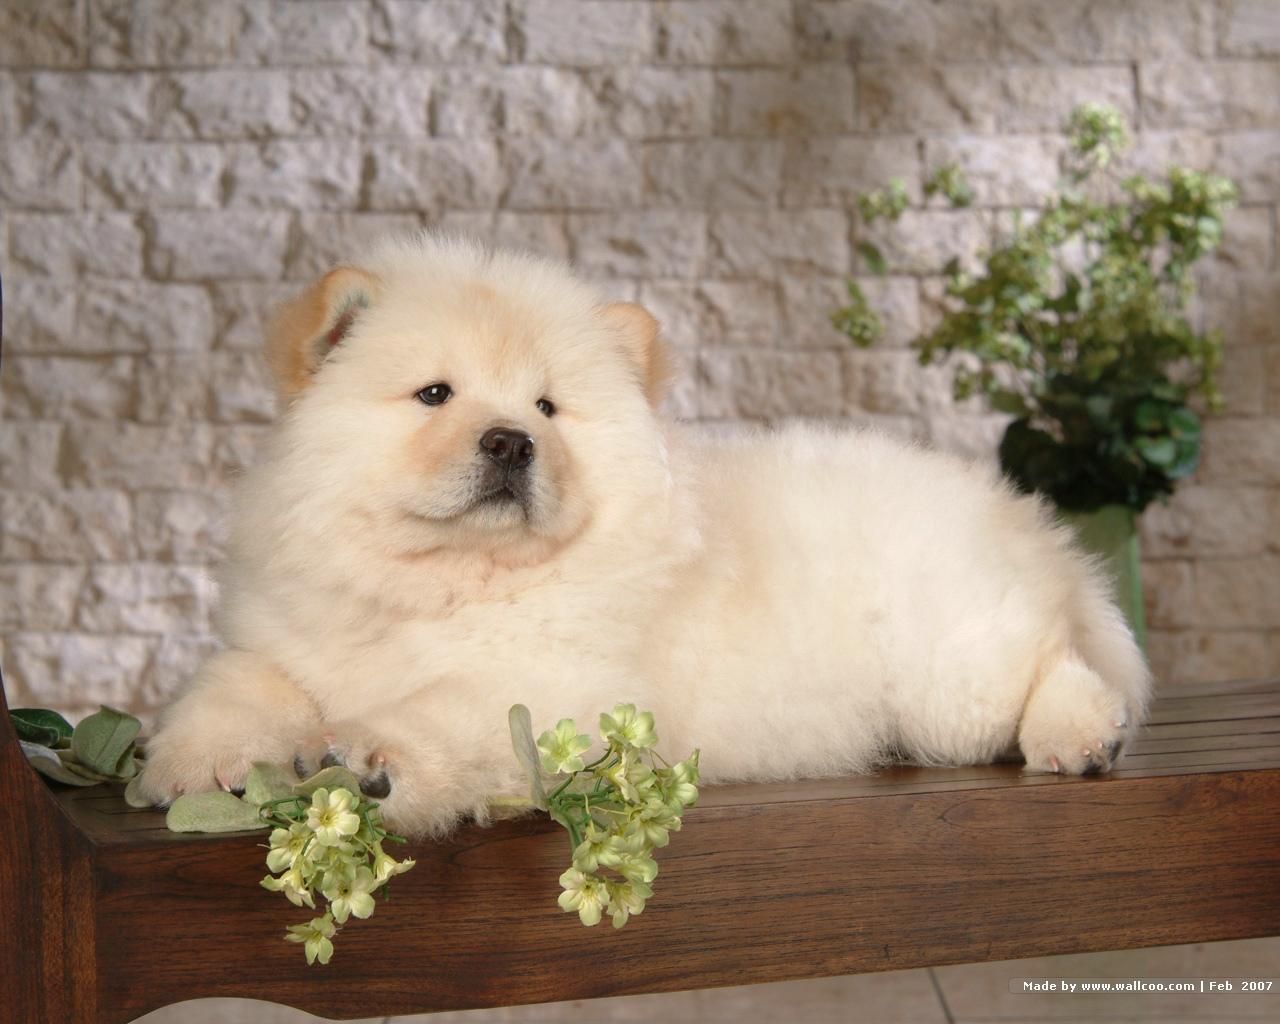 Puppies Wallpaper: Chow Chow Puppy Wallpaper. Bear dog breed, Chow chow puppy, Polar bear dogs